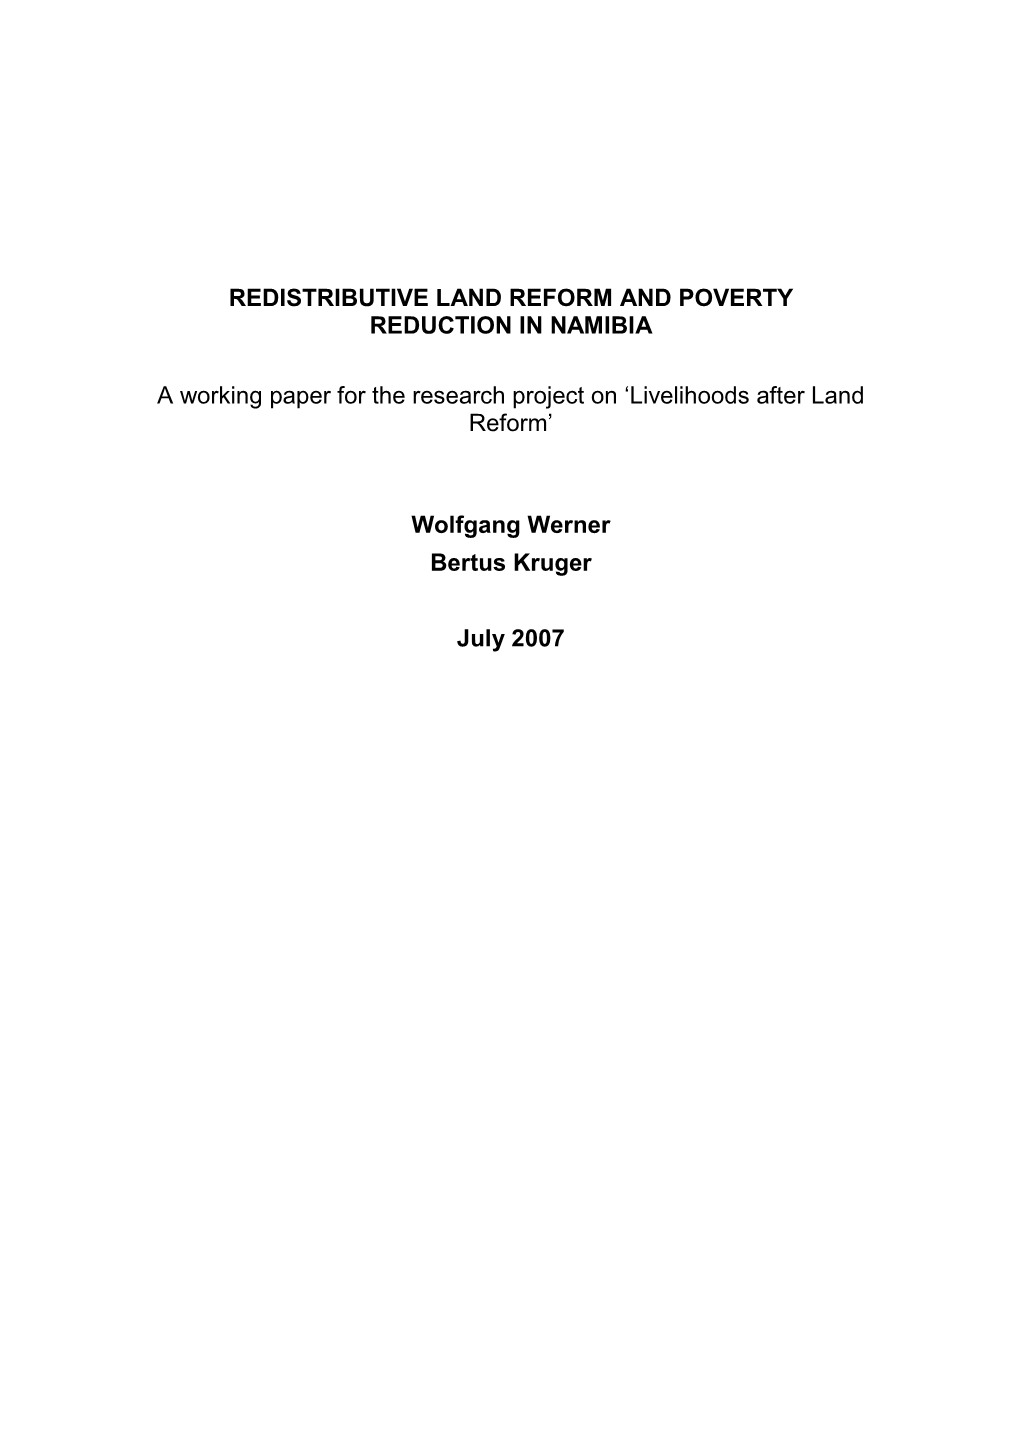 Redistributive Land Reform and Poverty Reduction in Namibia